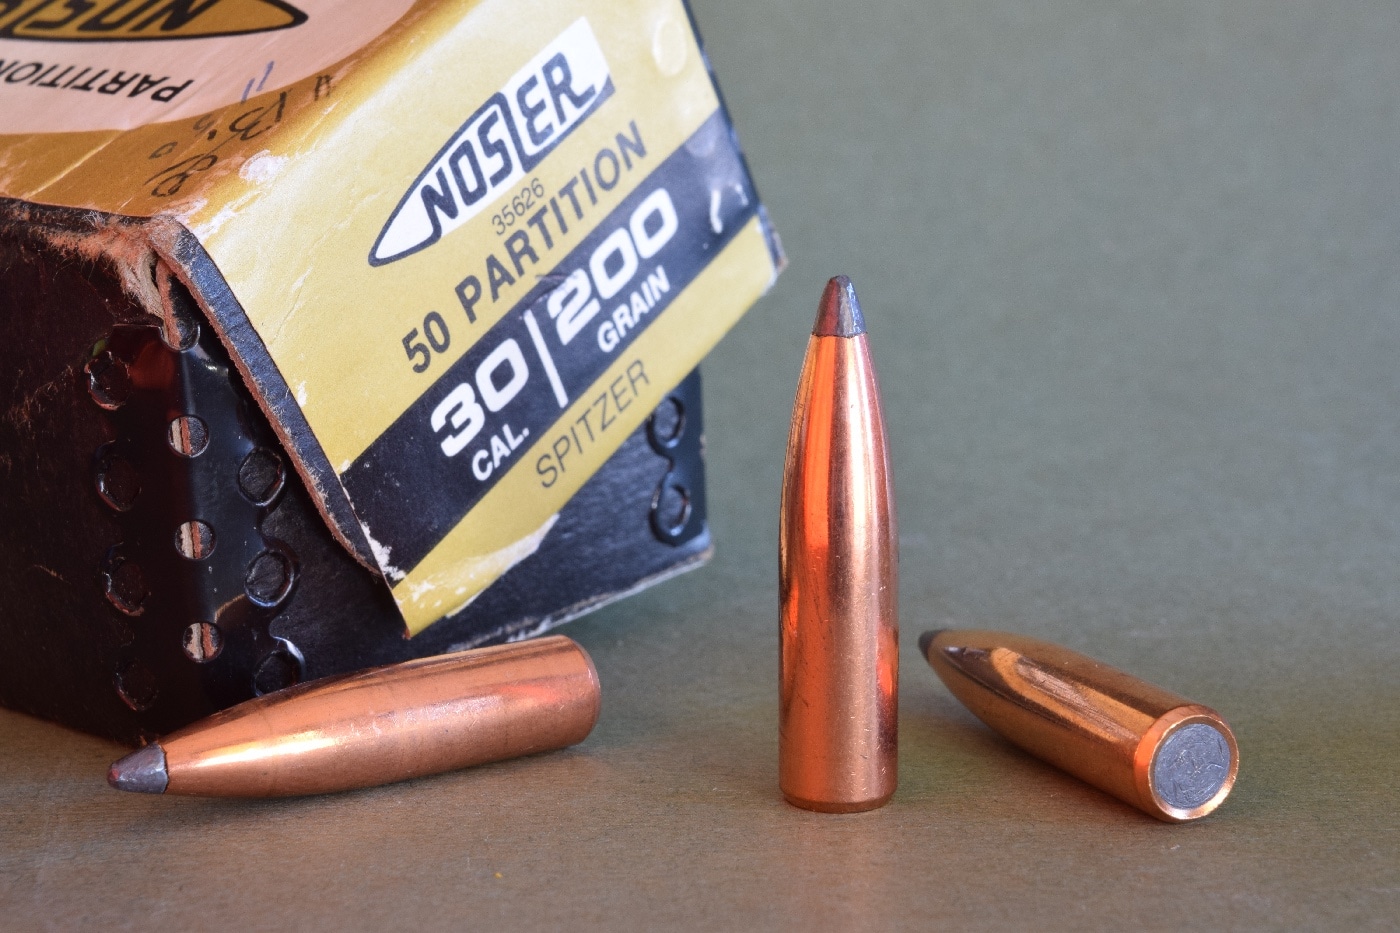 In this photograph, the author shows us three .30-caliber Nosler Partition bullets. They are 200-grains in mass. Nosler produces six different hunting cartridges. The first to be introduced was .26 Nosler, followed by .28 Nosler, .30 Nosler, .33 Nosler, .22 Nosler, and .27 Nosler.